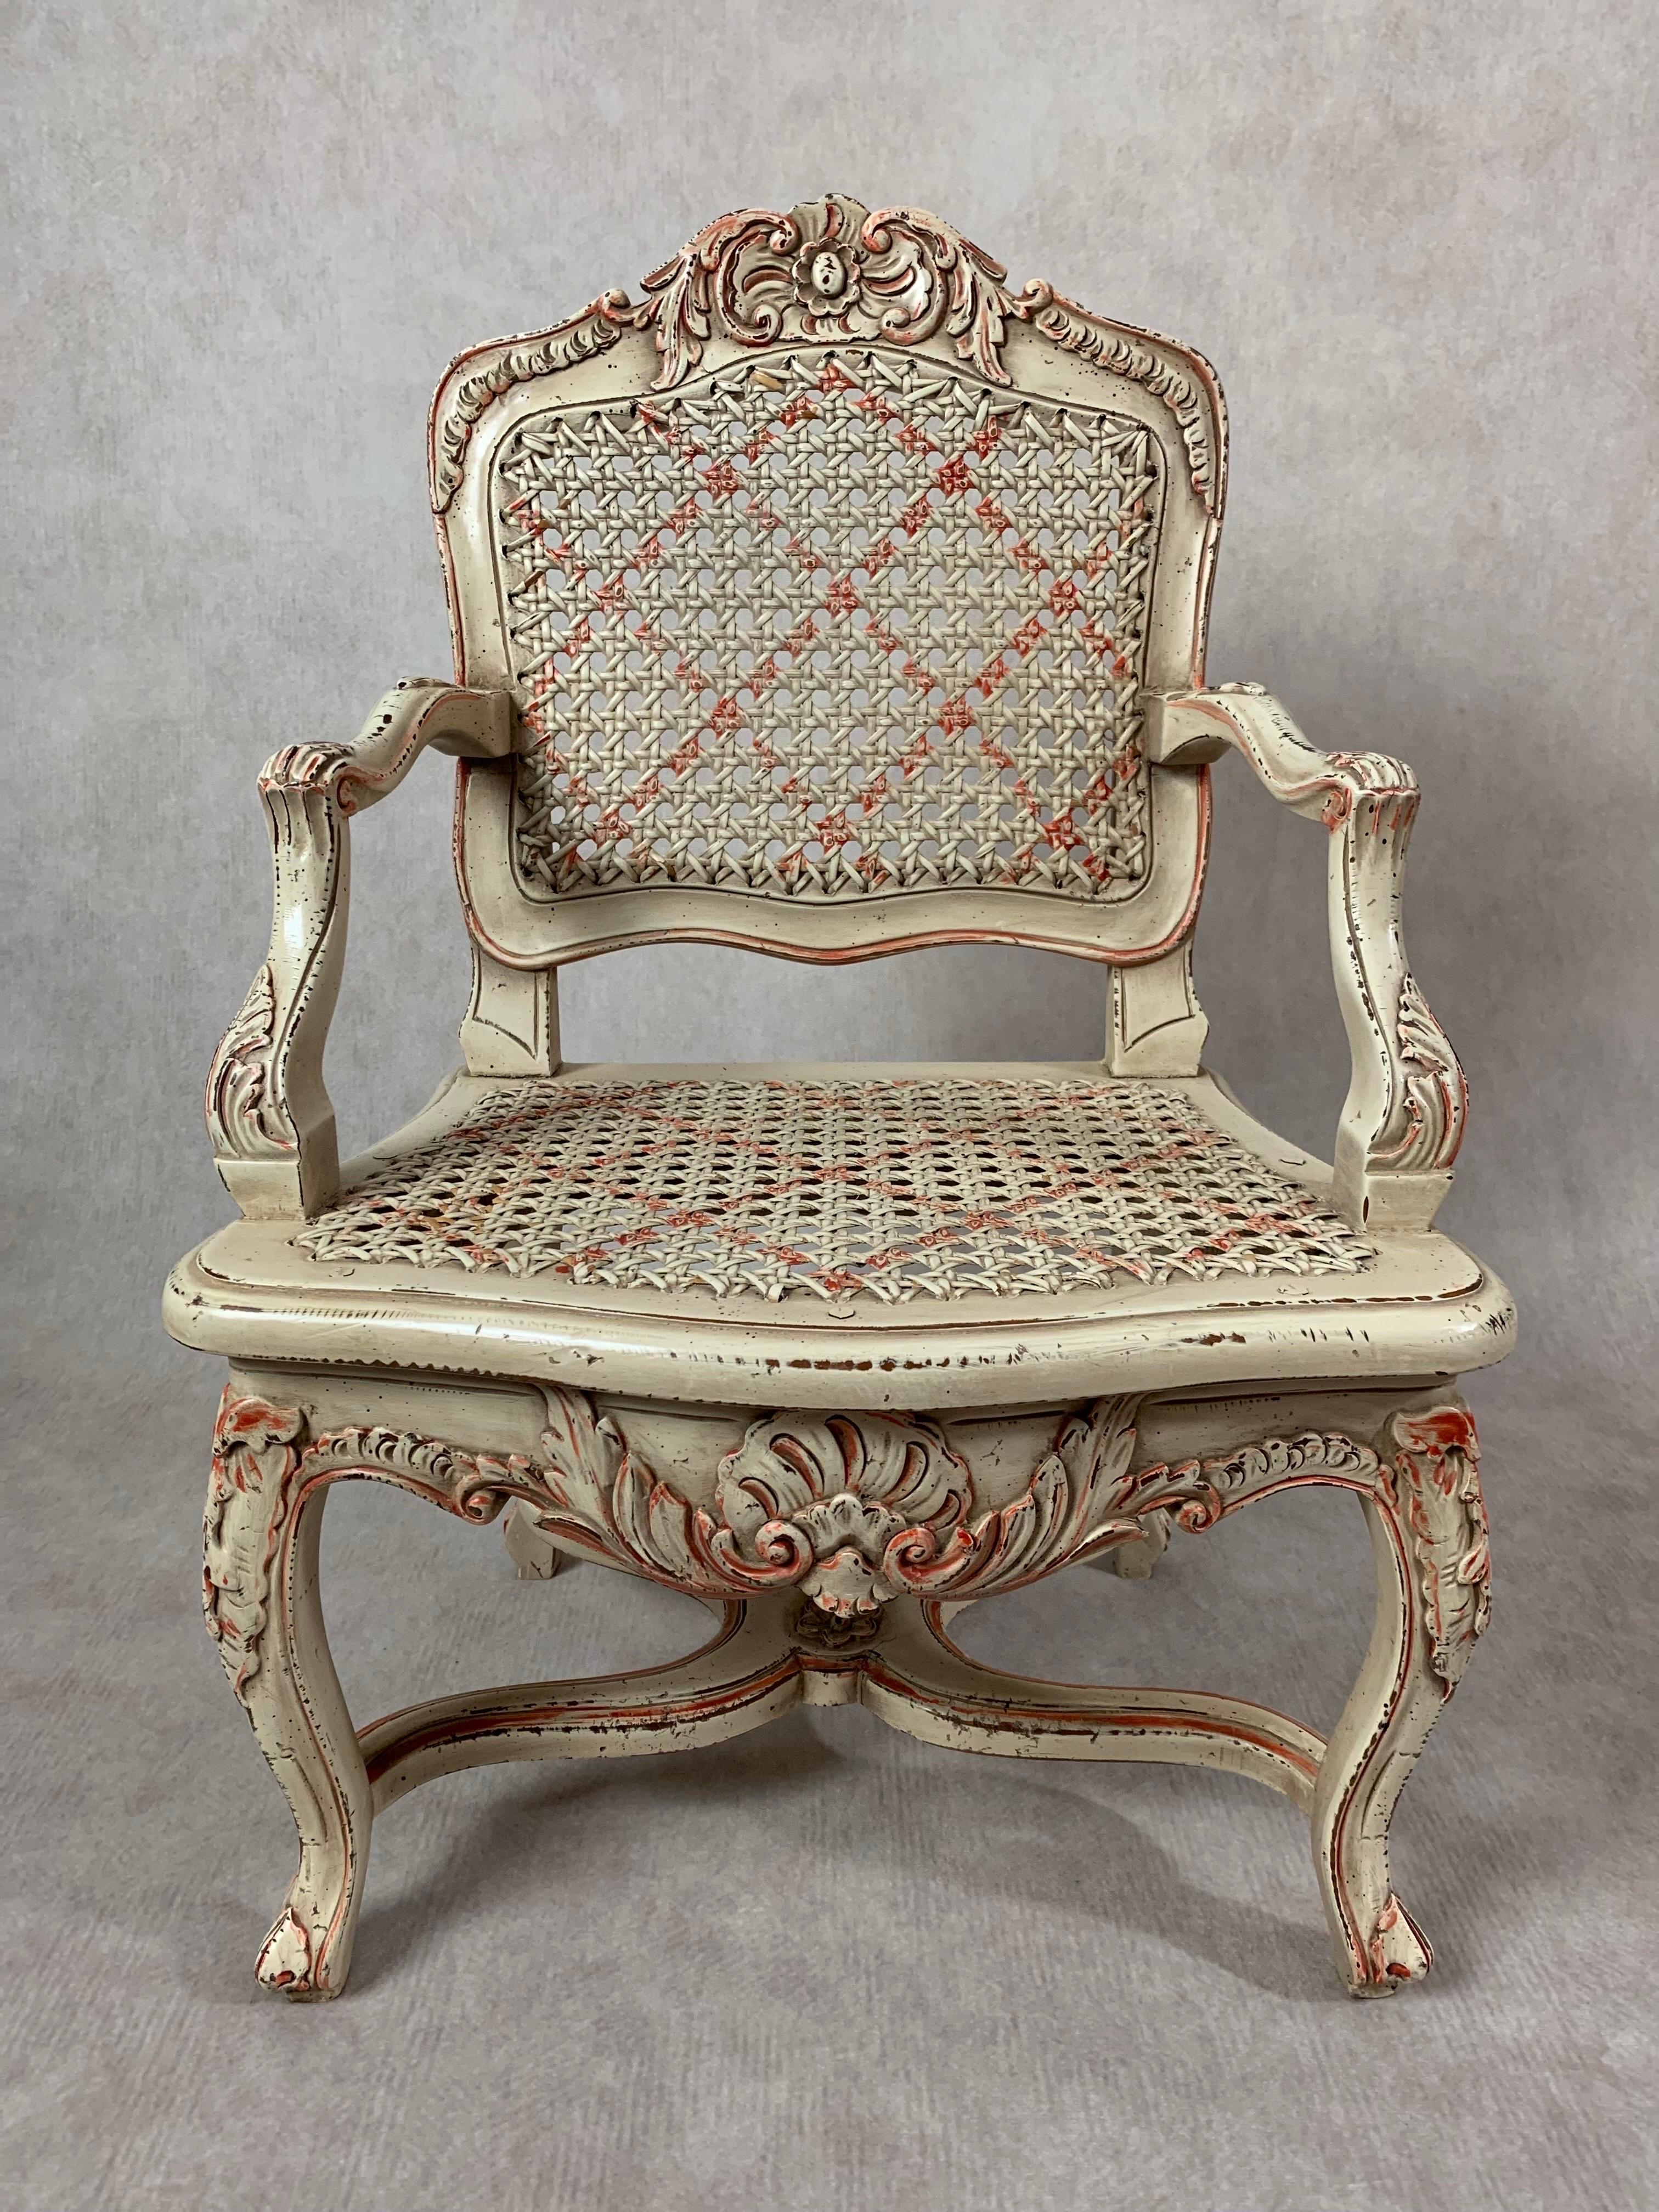 Pair of Miniature/Doll Size Louis XVI Caned Bergere Fauteuil Arm Chairs For Sale 2